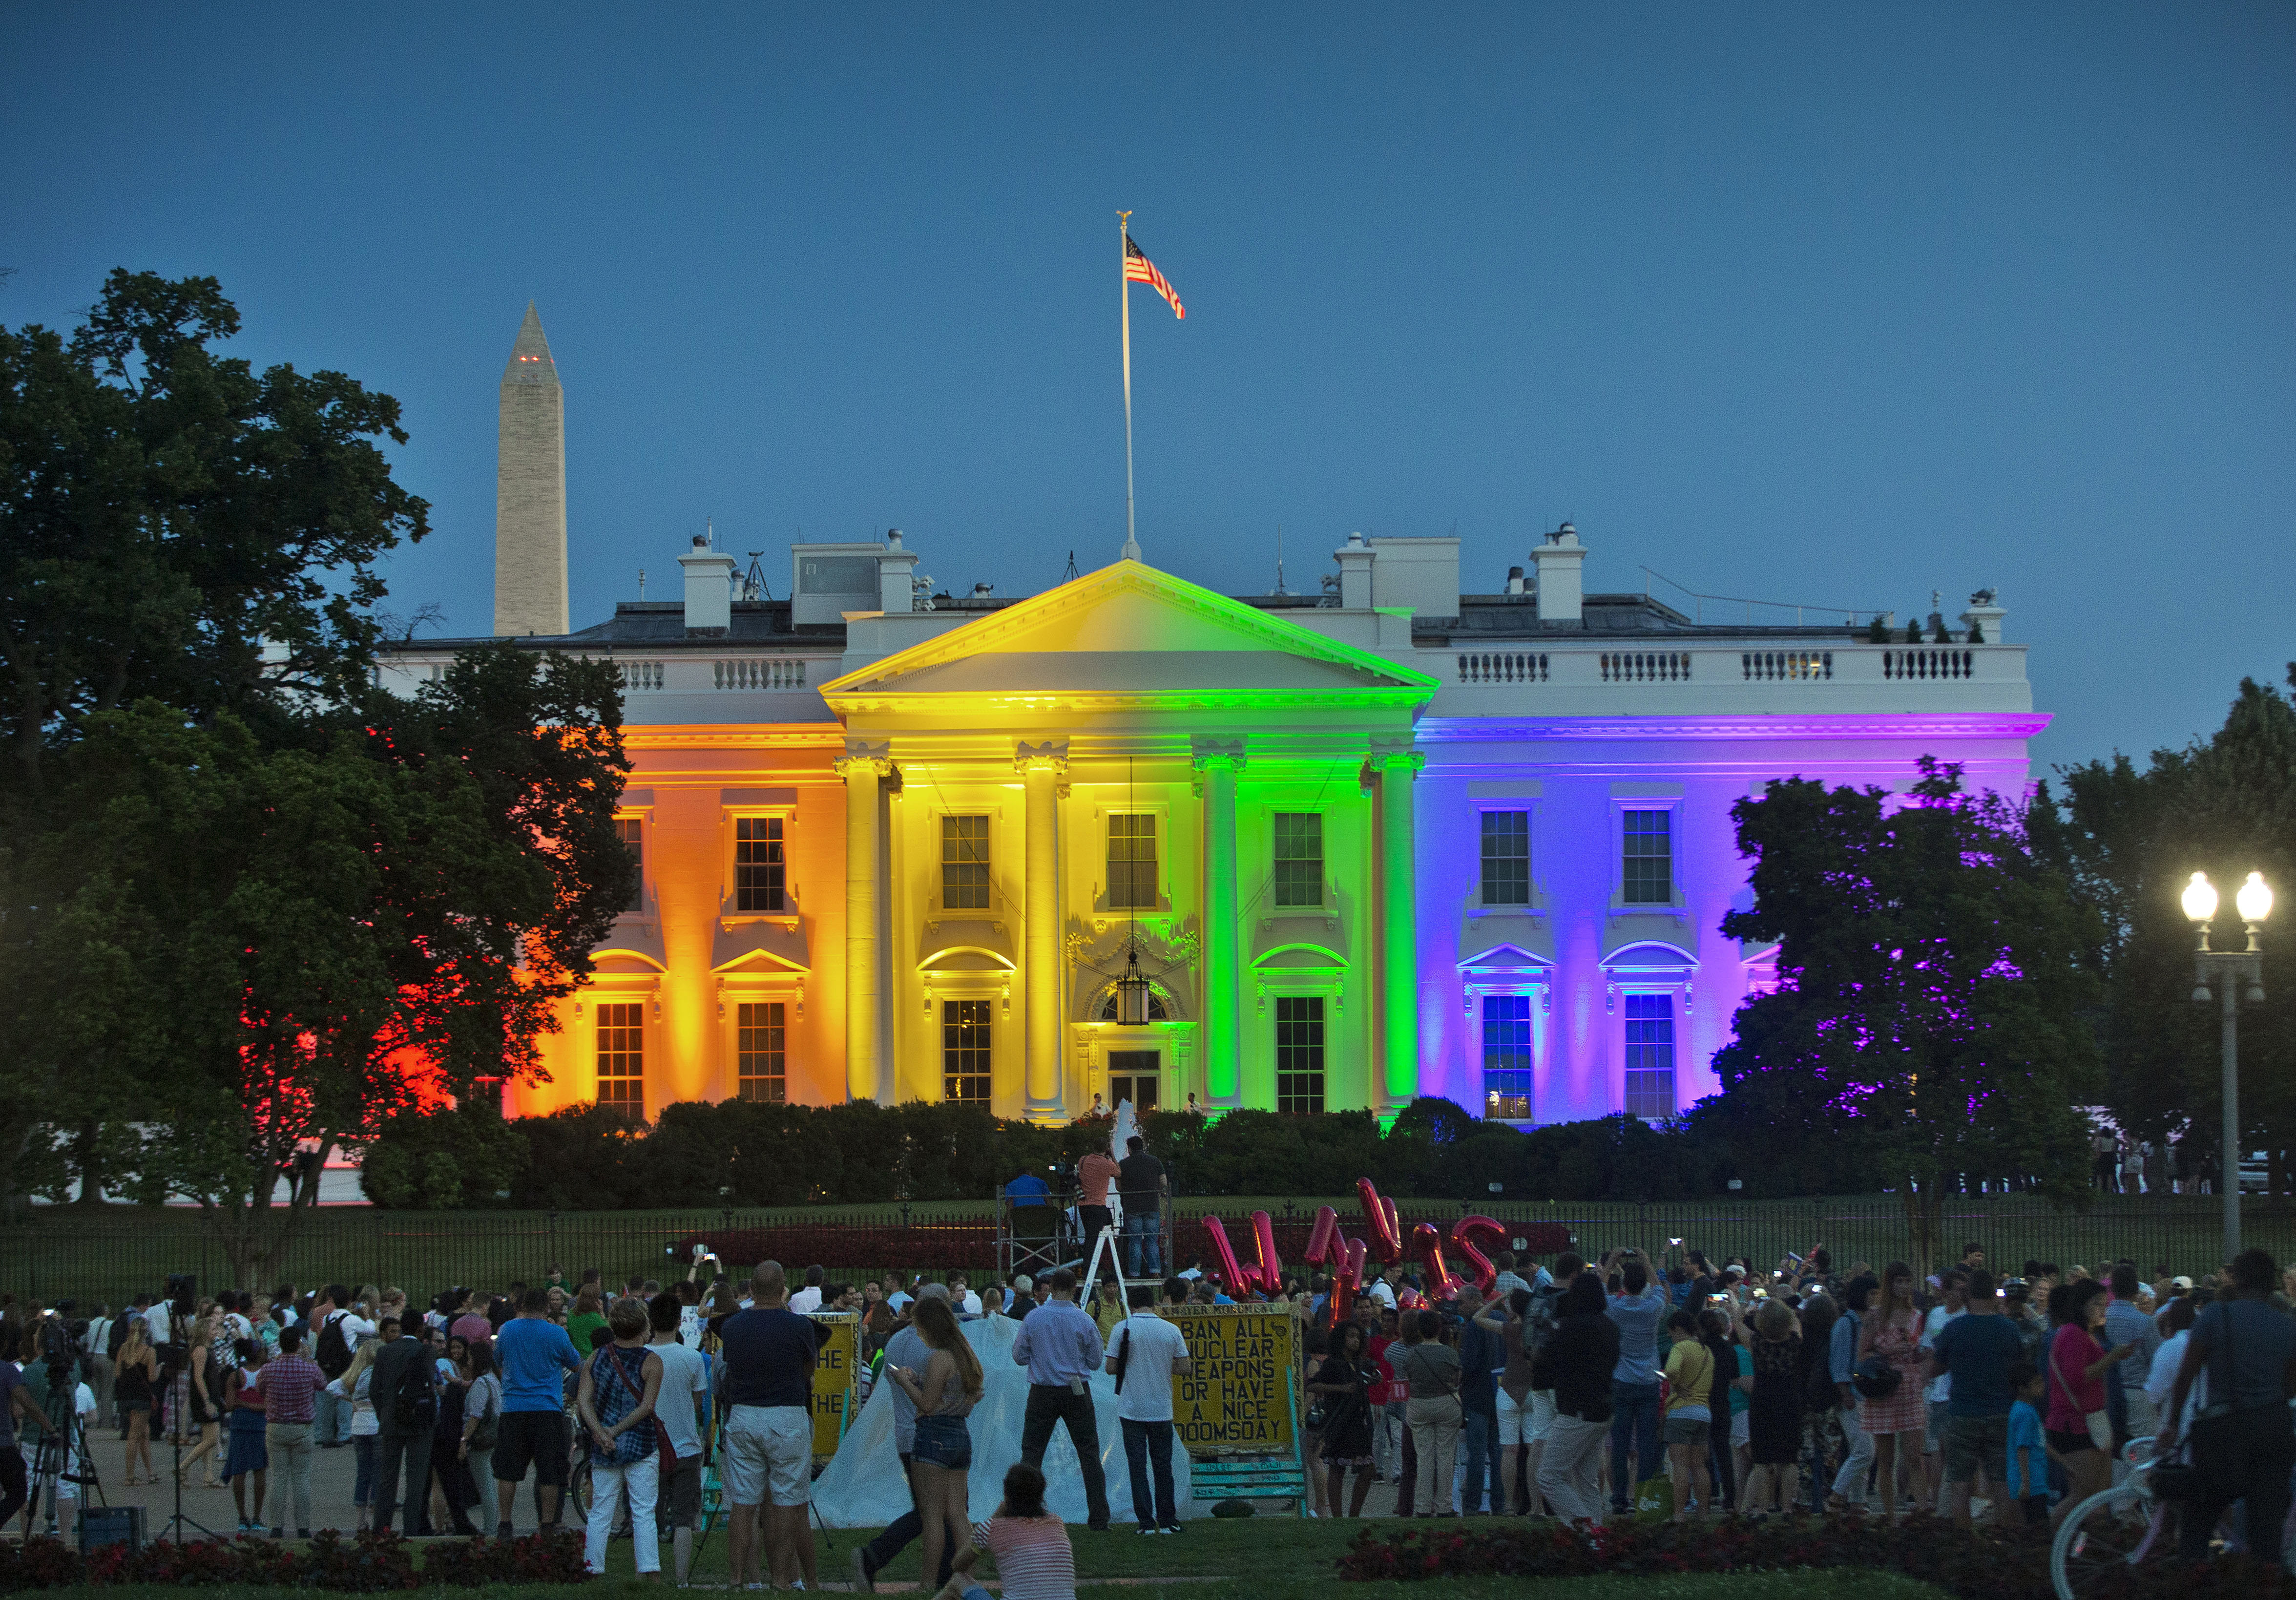 FILE - In this Friday, June 26, 2015 file photo, people gather in Lafayette Park to see the White House illuminated with rainbow colors in commemoration of the Supreme Court's ruling to legalize same-sex marriage in Washington. The Trump administration Friday, June 12, 2020, finalized a regulation that overturns Obama-era protections for transgender people against sex discrimination in health care. Photo: AP